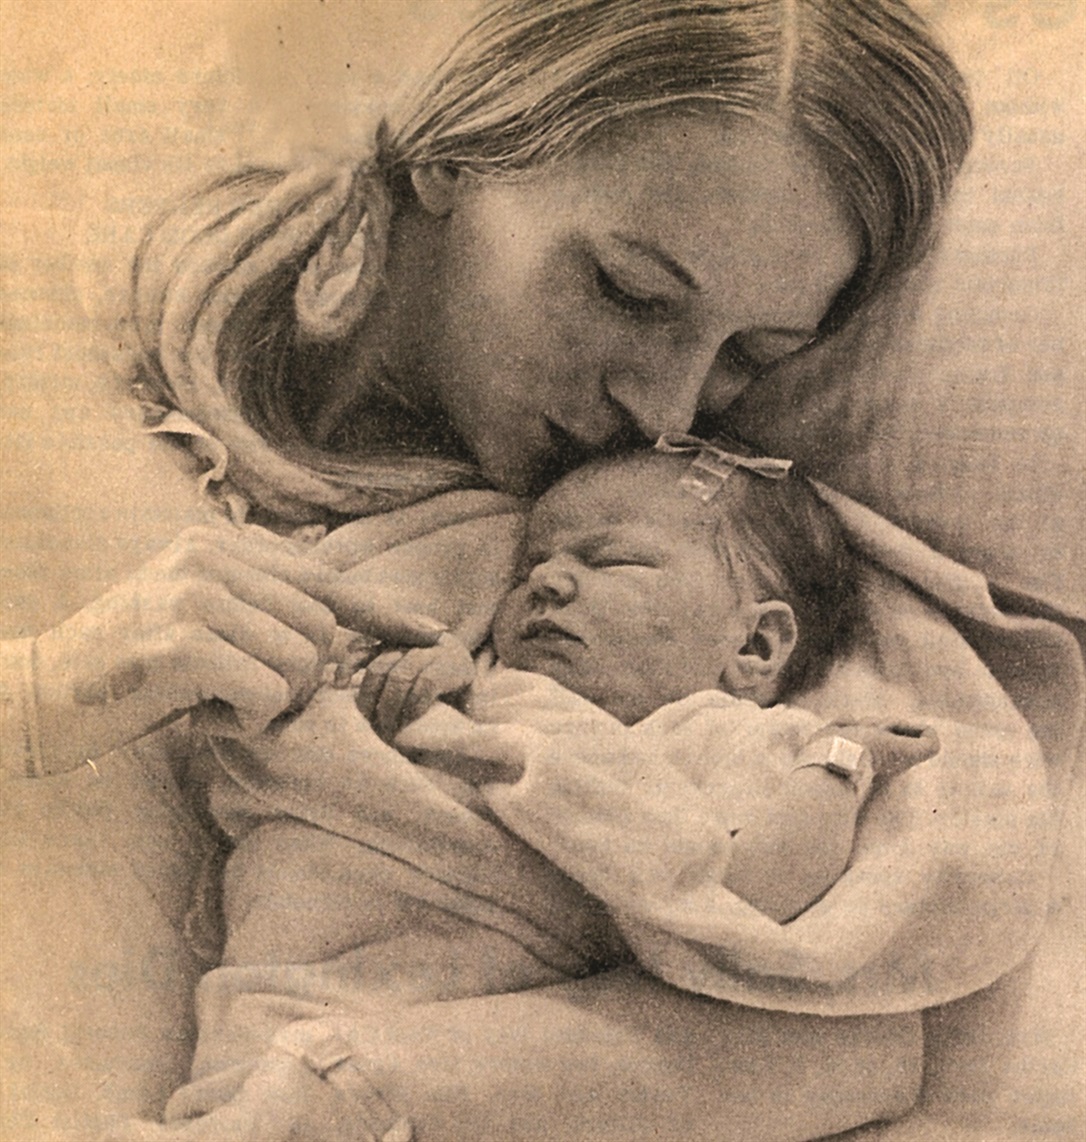 Windy's mother holding Windy at birth in 1971